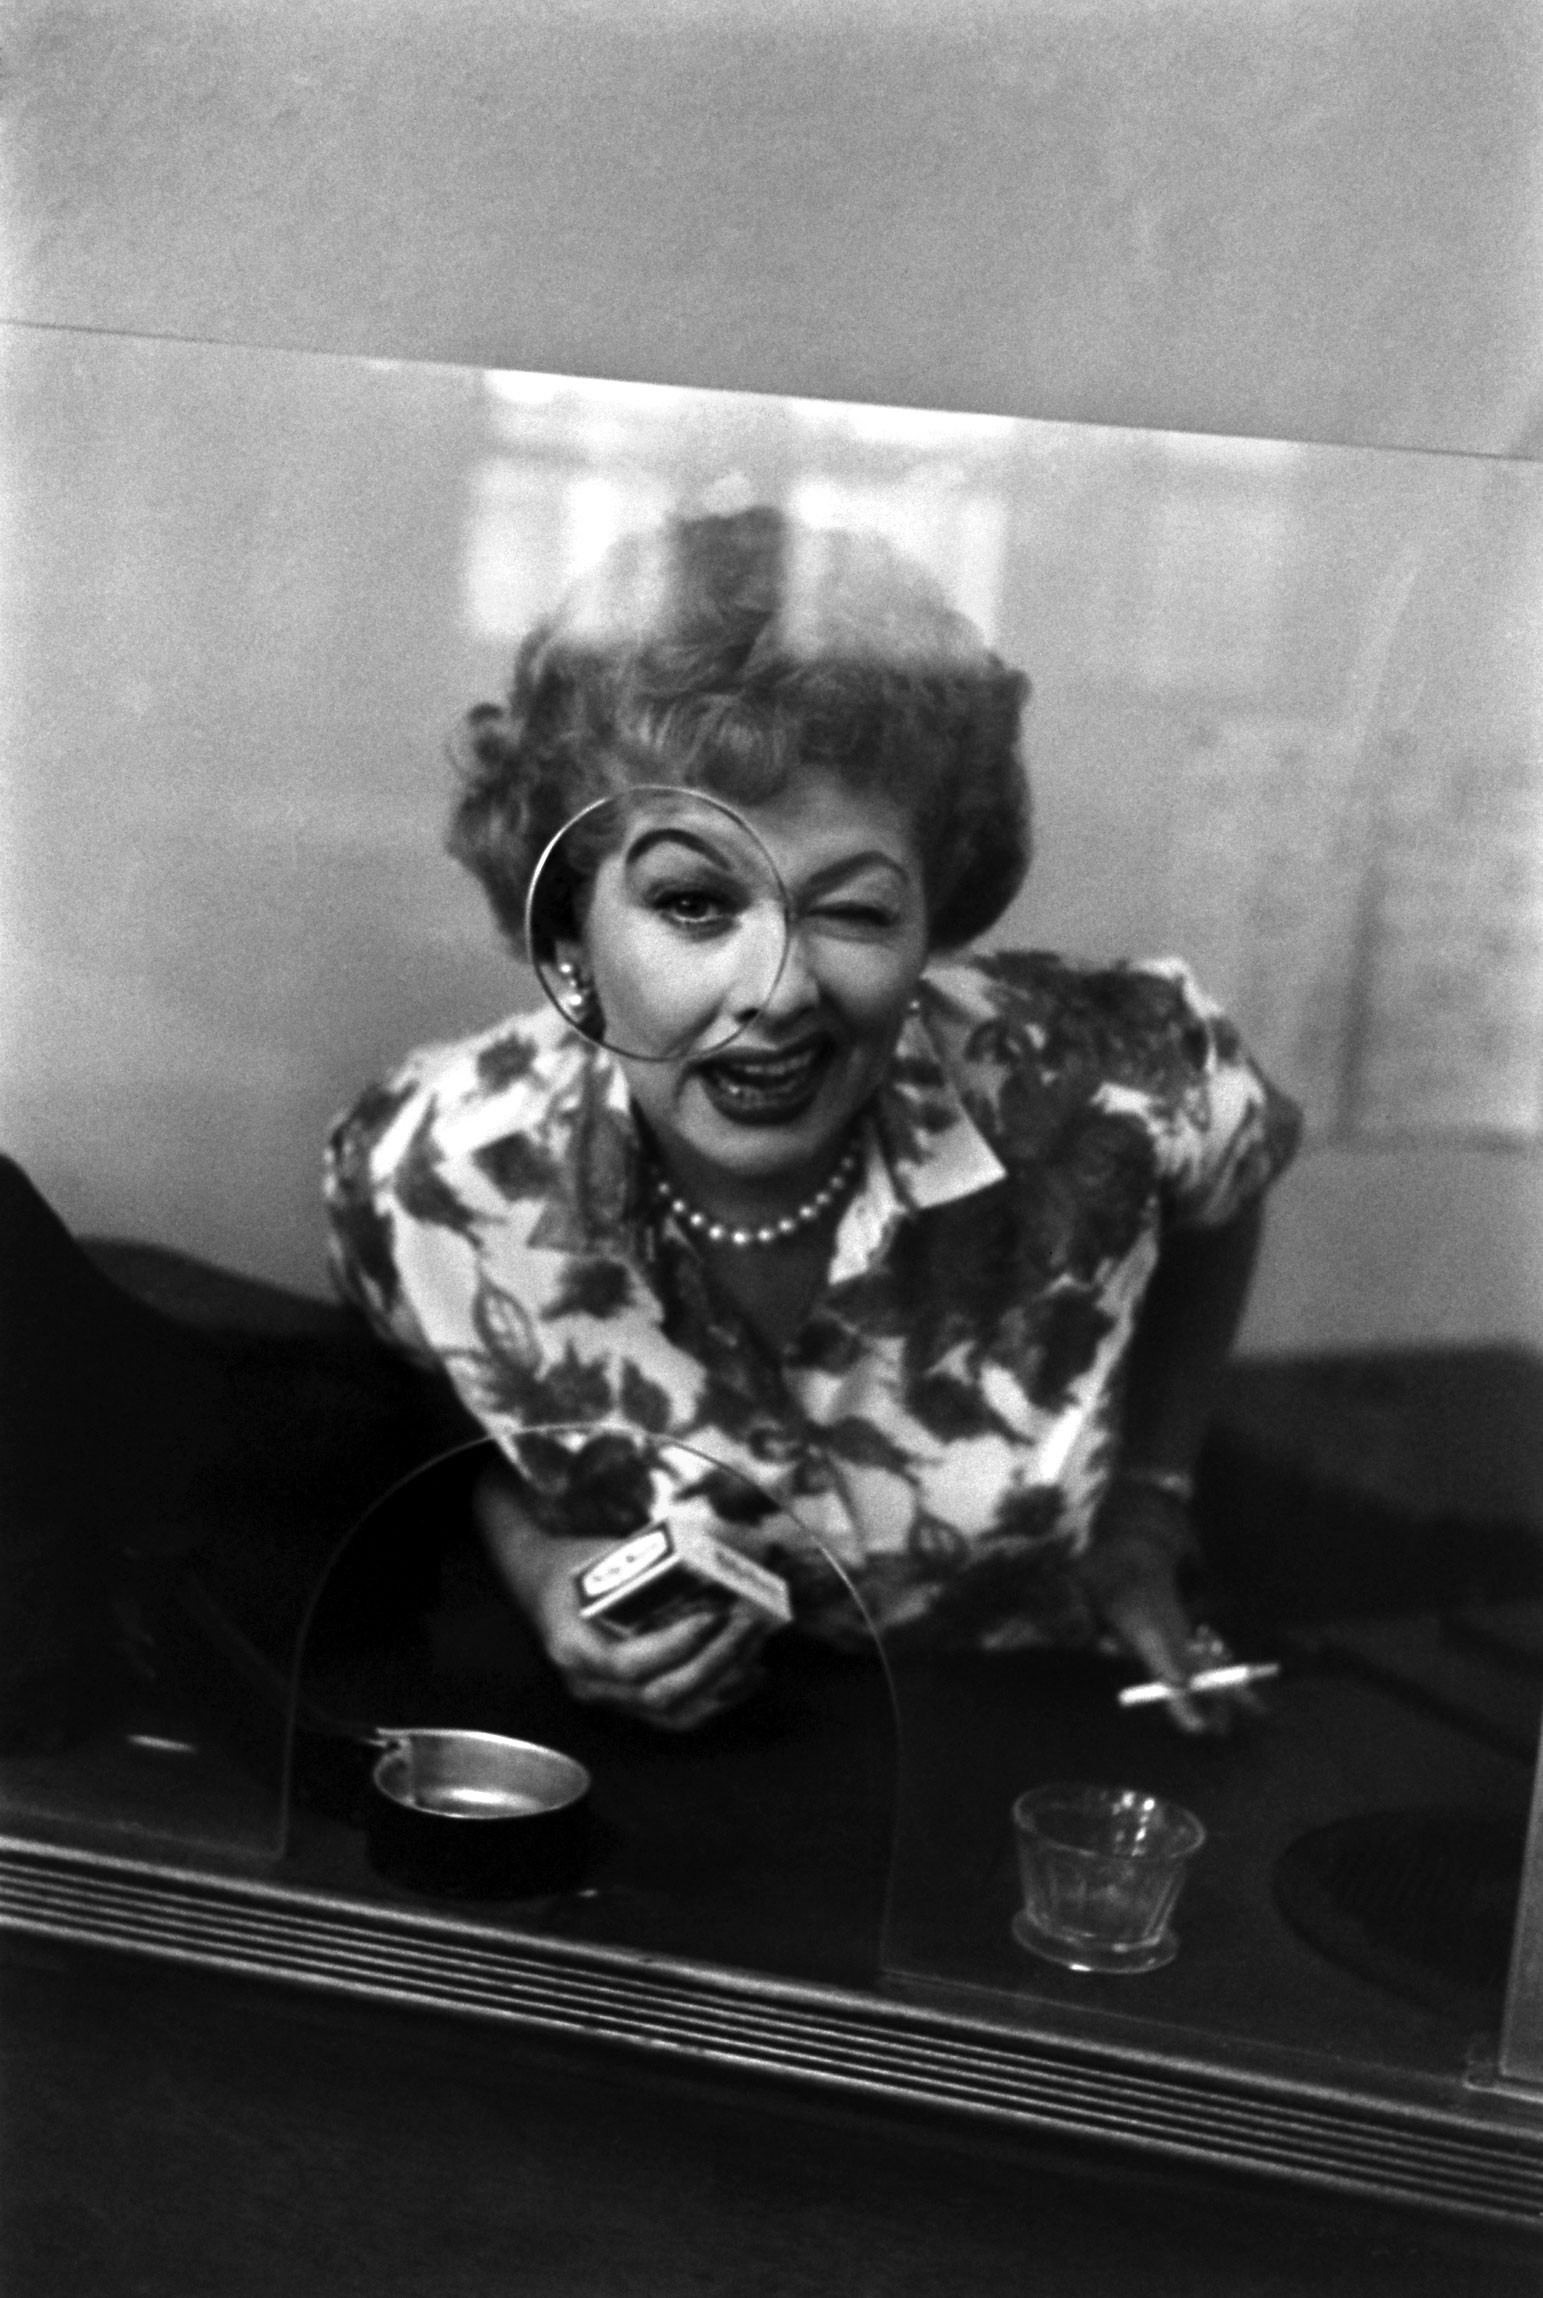 In 1958, on the set of The Lucy-Desi Comedy Hour — a collection of occasional, lavish specials that followed the adventures of the Ricardos and the Mertzes after I Love Lucy -- Lucille Ball does a comedy bit as a wisecracking clerk.